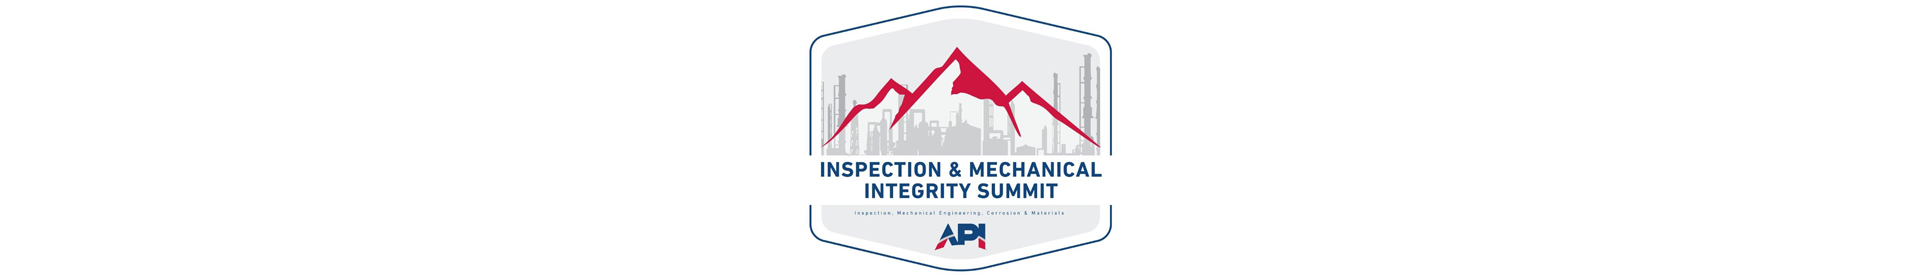 2022 Inspection and Mechanical Integrity Summit Event Banner